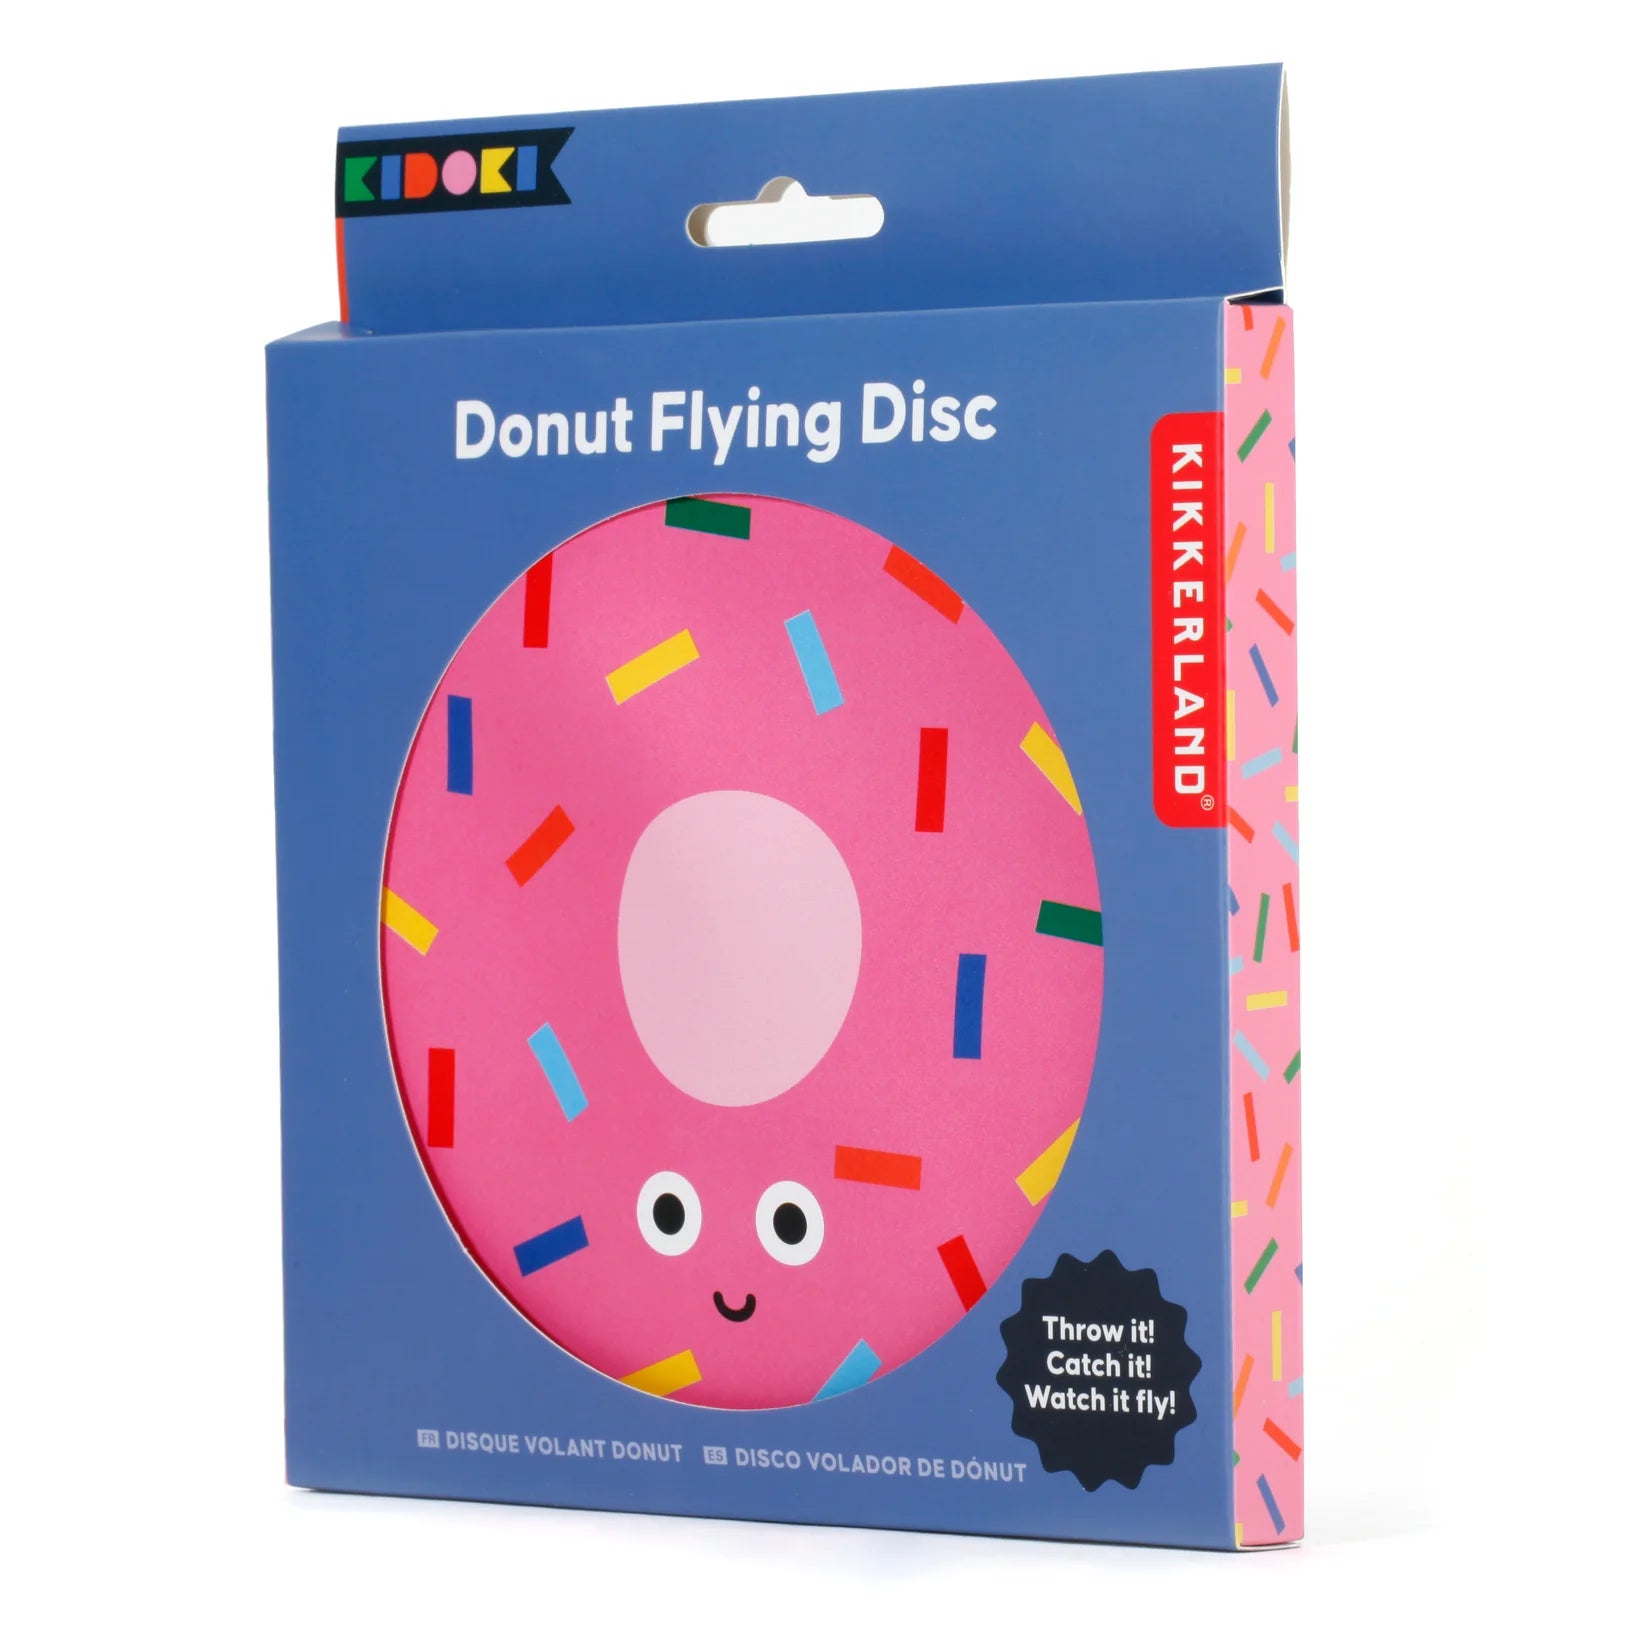 Kikkerland Flexible Silicone Flying Discs – Assorted Styles – Each Sold Separately